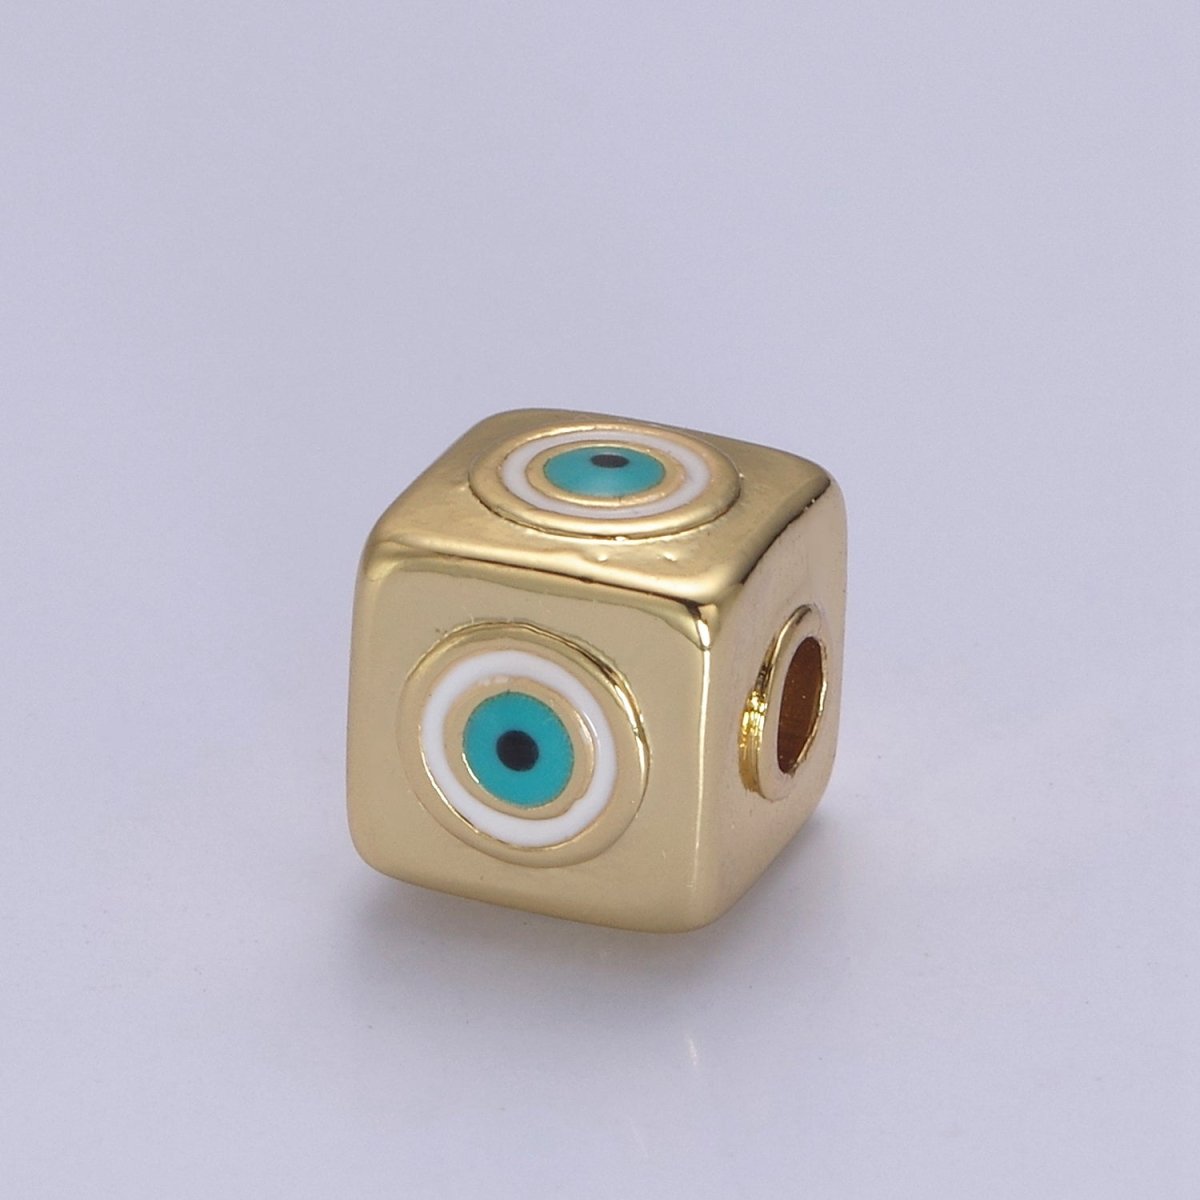 9mm Evil eye Cube charm Beads, Square Spacer Beads on Four Sides, Turkish Evil Eye, Gold bead Spacer Lucky Symbol Cube Bead B-774 to B-779 - DLUXCA